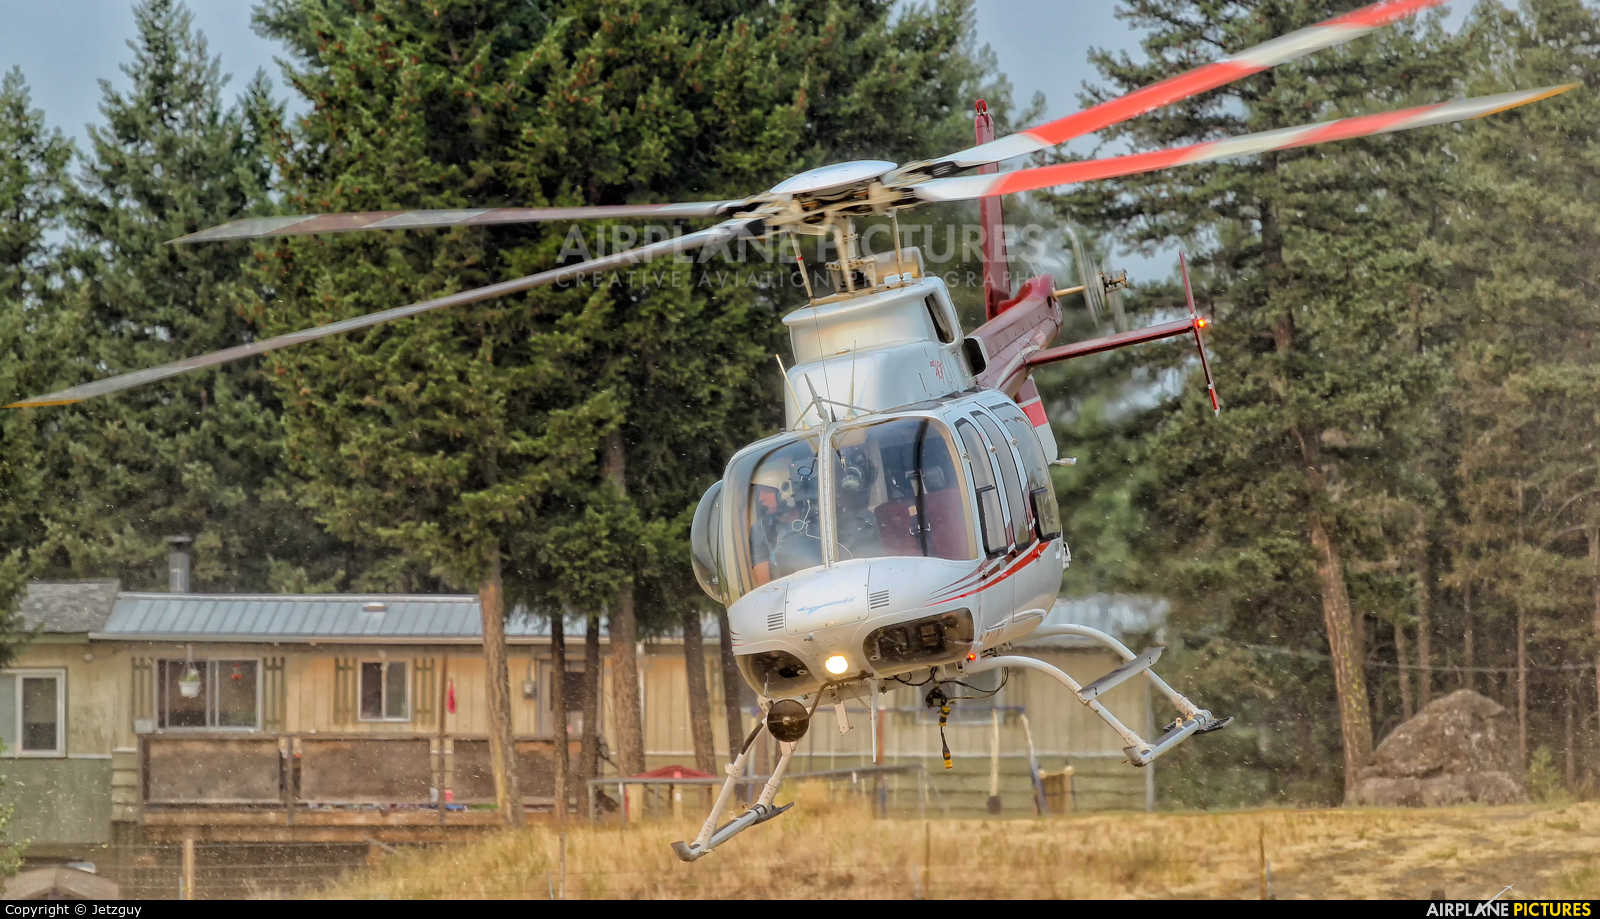 Valley Helicopters C-FAVY aircraft at 108 Mile Ranch, BC